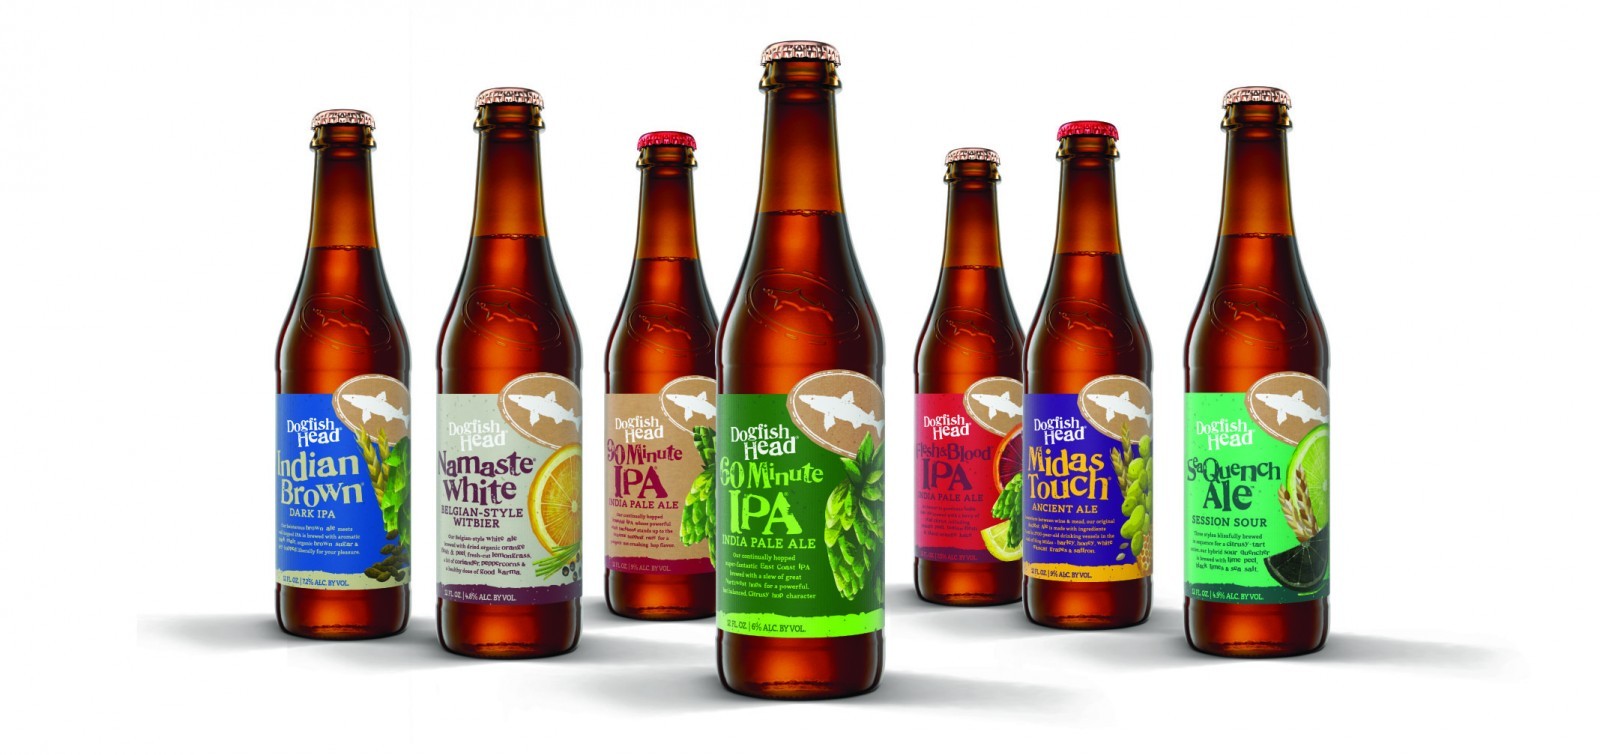 Interact Boulder – Dogfish Head Redesign